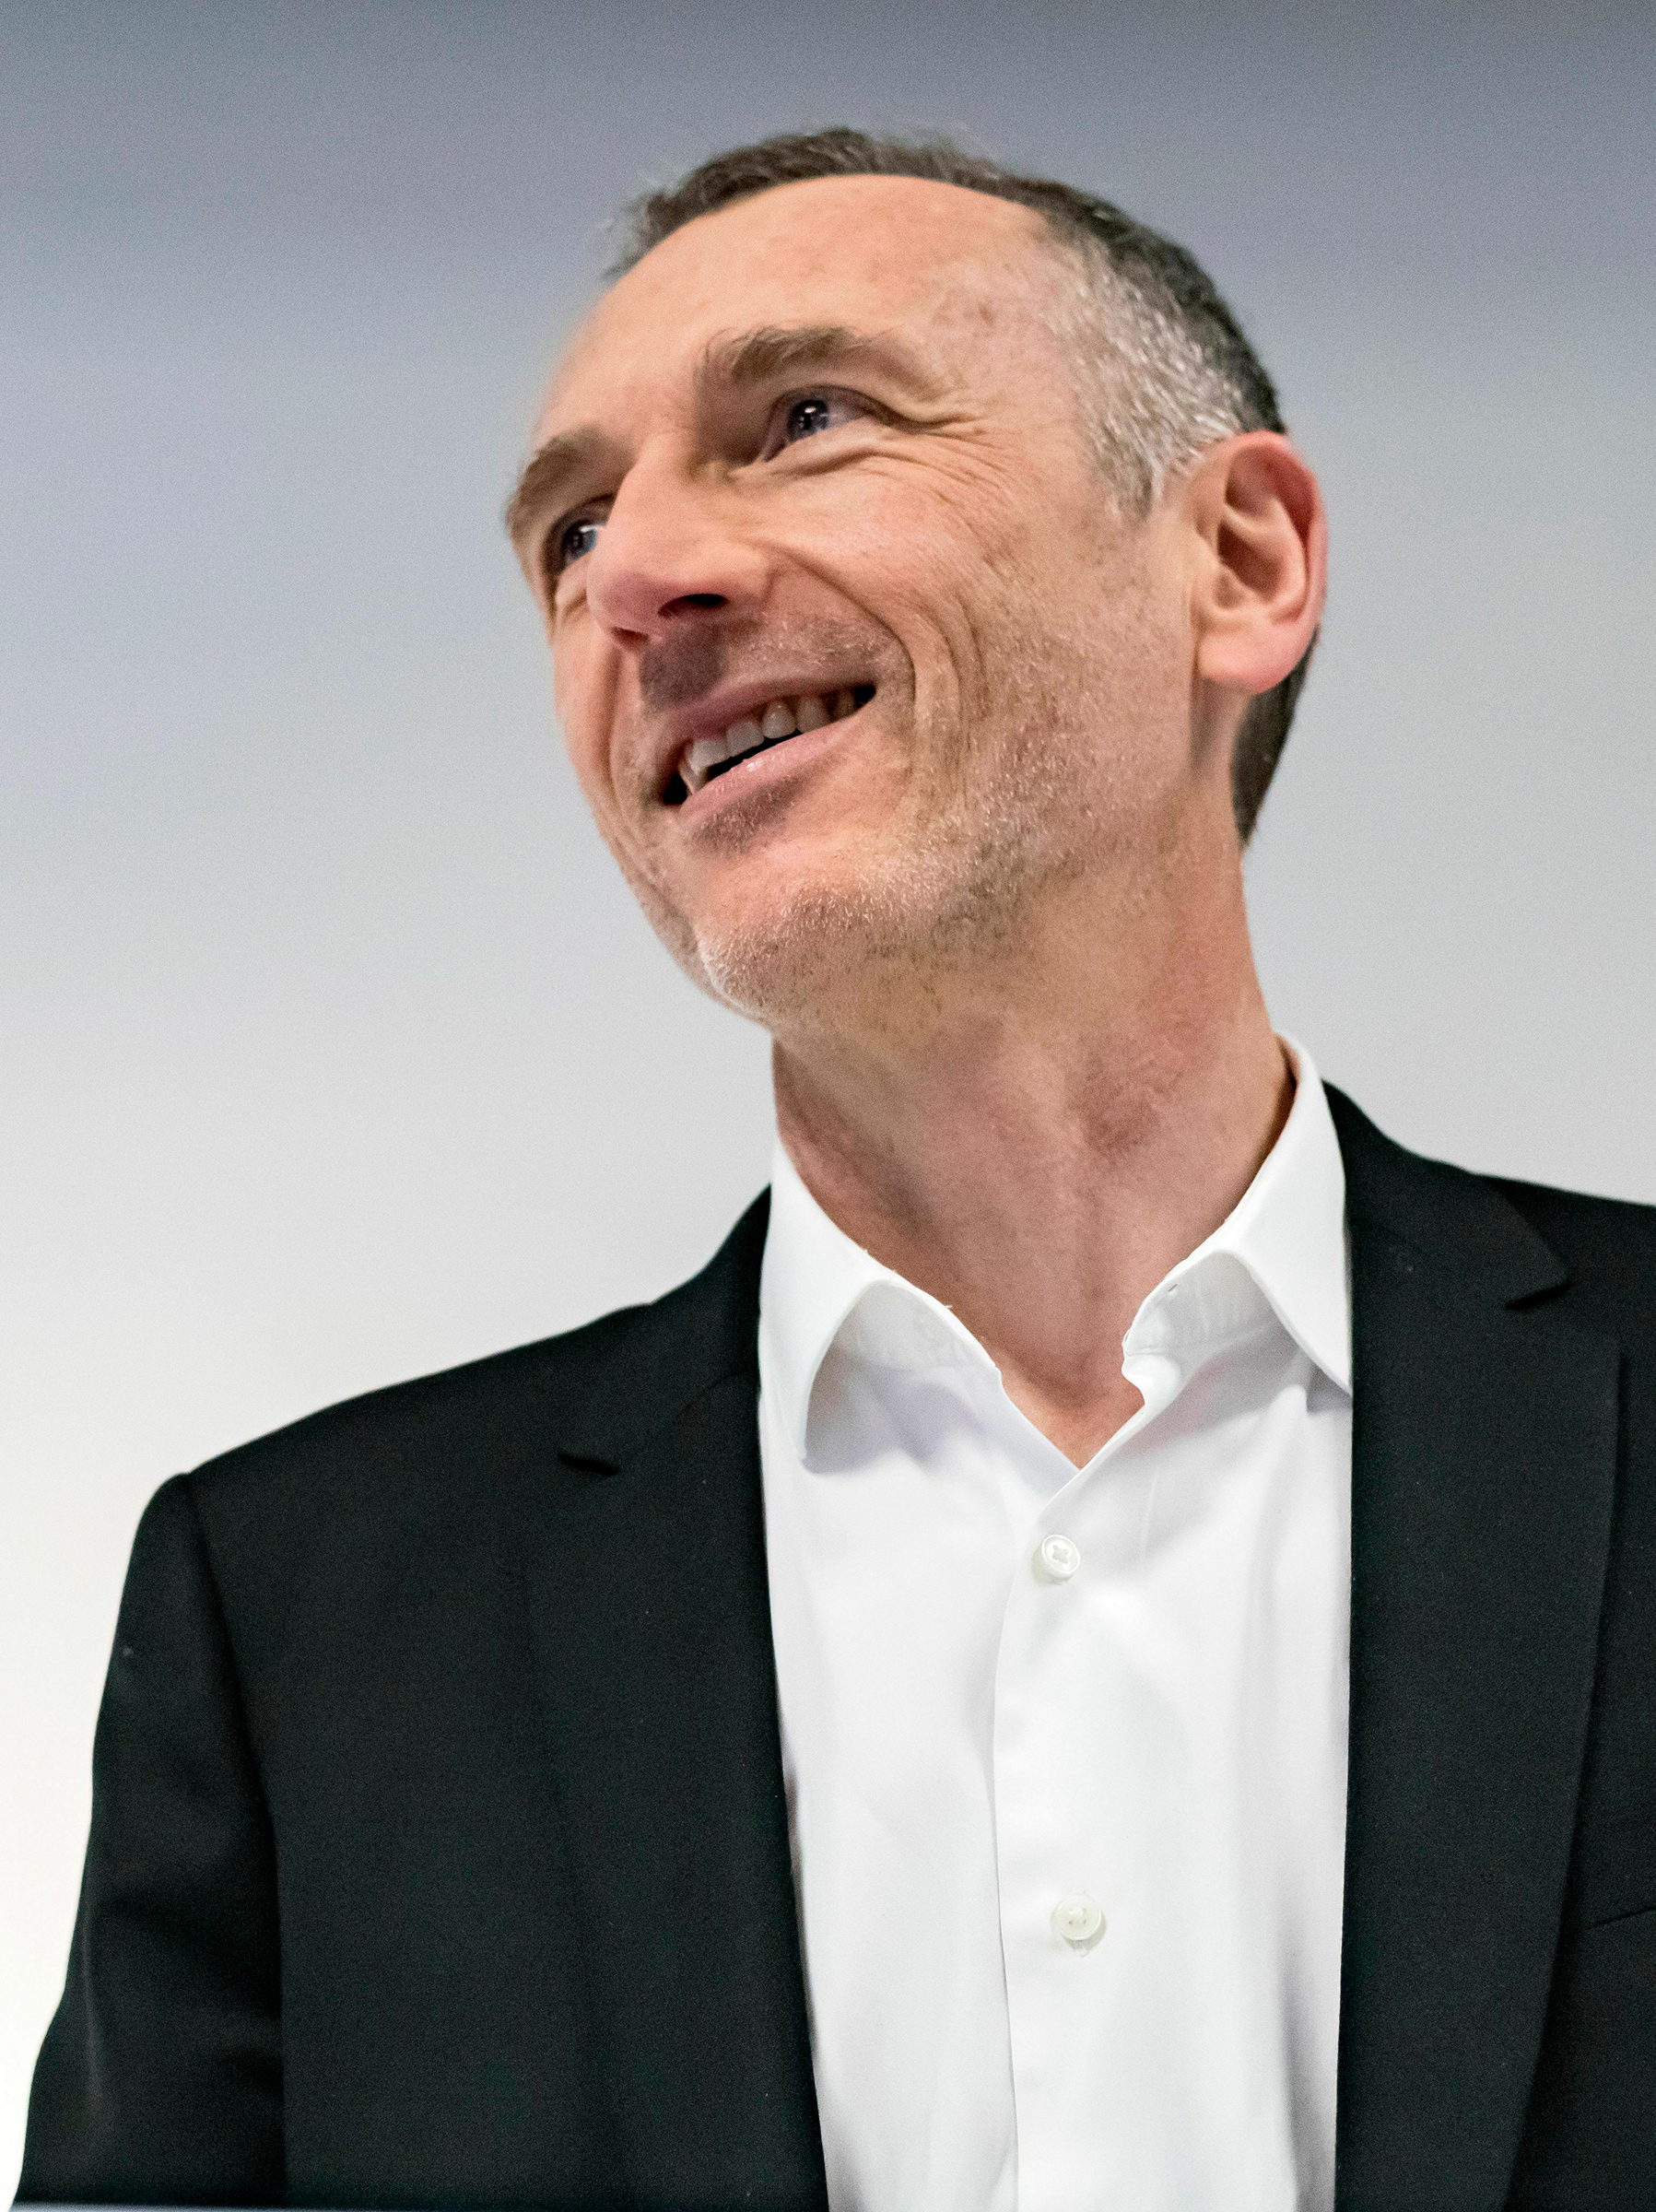 Faber presents sales results as CEO of Danone in 2019 (Mario Fourmy—Sipa/AP)